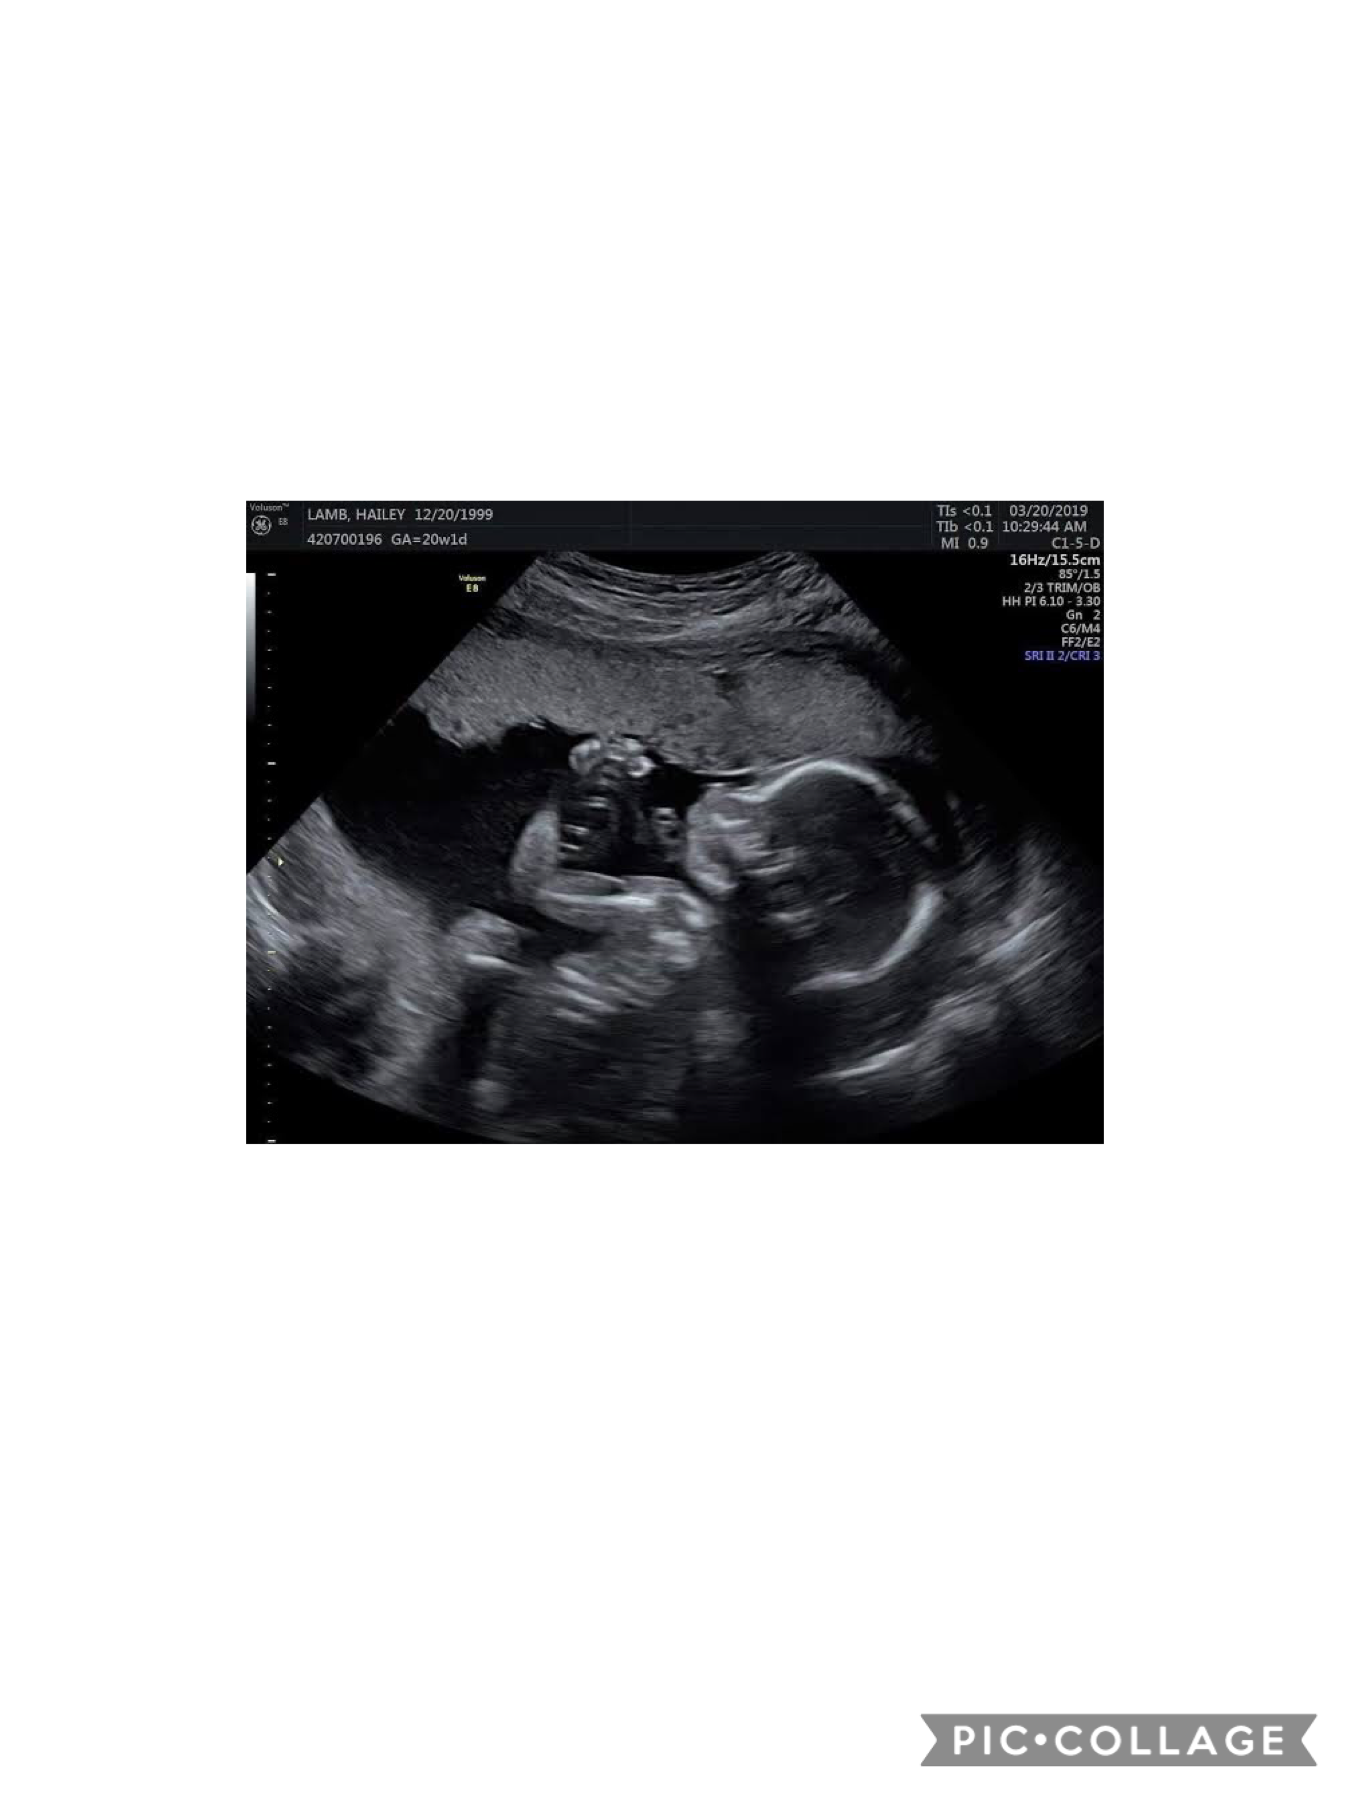 Baby p I’m so excited to meet you I will try to be the best dad ever 